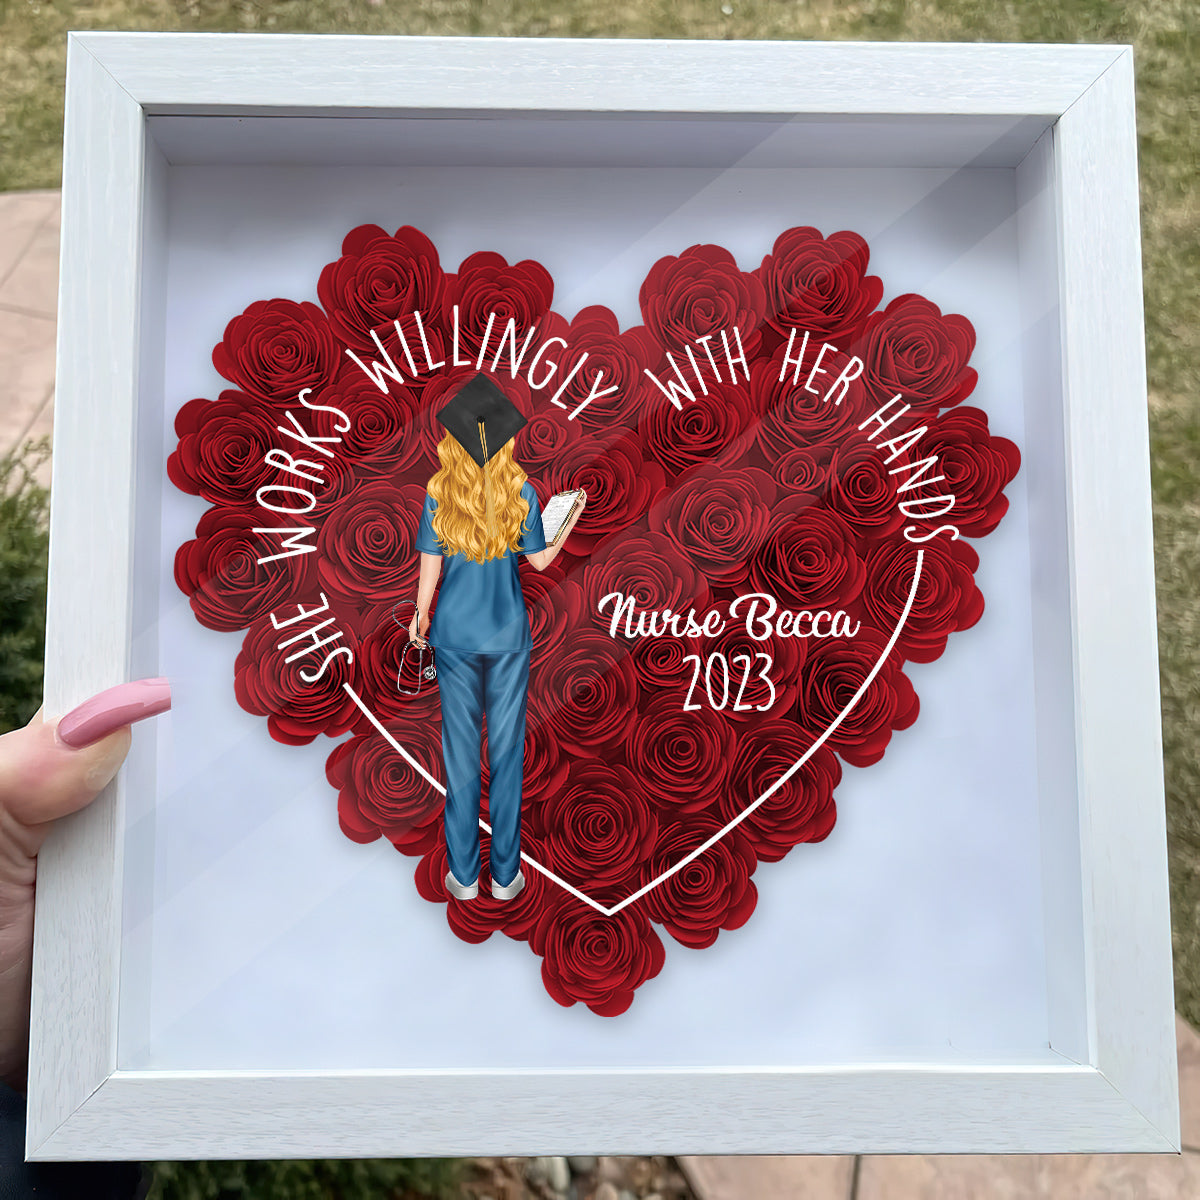 Discover Never Forget The Difference That You Make - Personalized Nurse Flower Frame Box